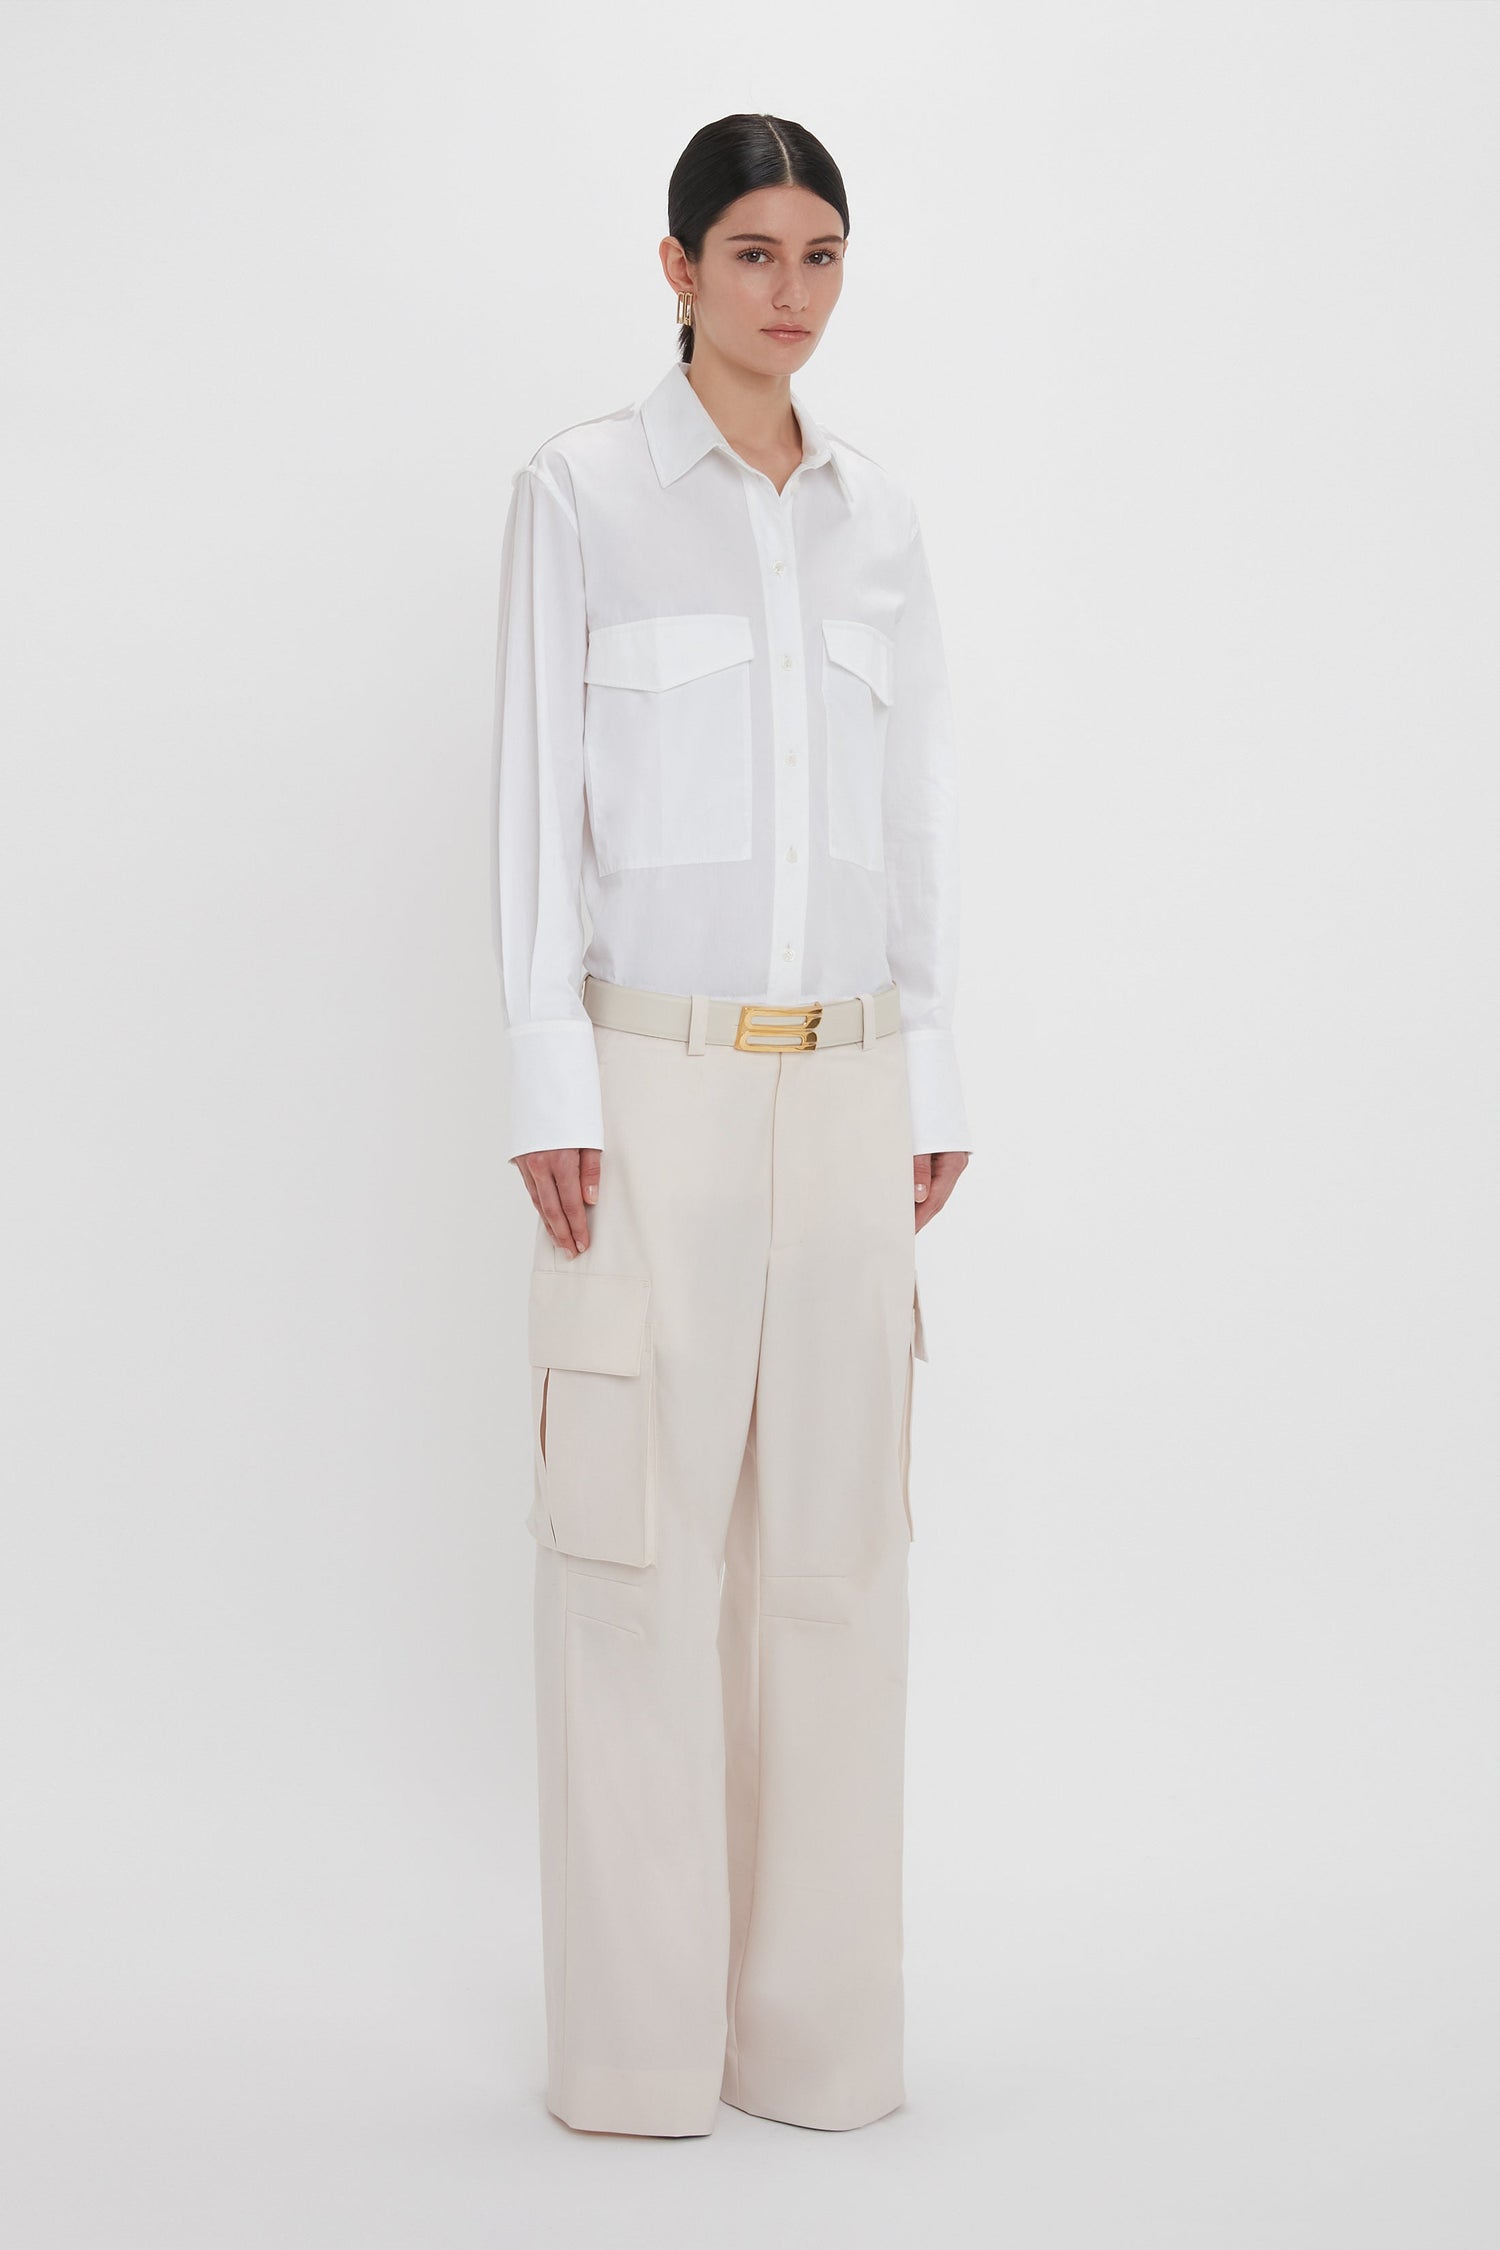 A person stands against a plain white background, wearing a Victoria Beckham Oversized Pocket Shirt In White and beige relaxed cargo trousers with a belt. They have dark hair pulled back and are looking slightly off-camera.